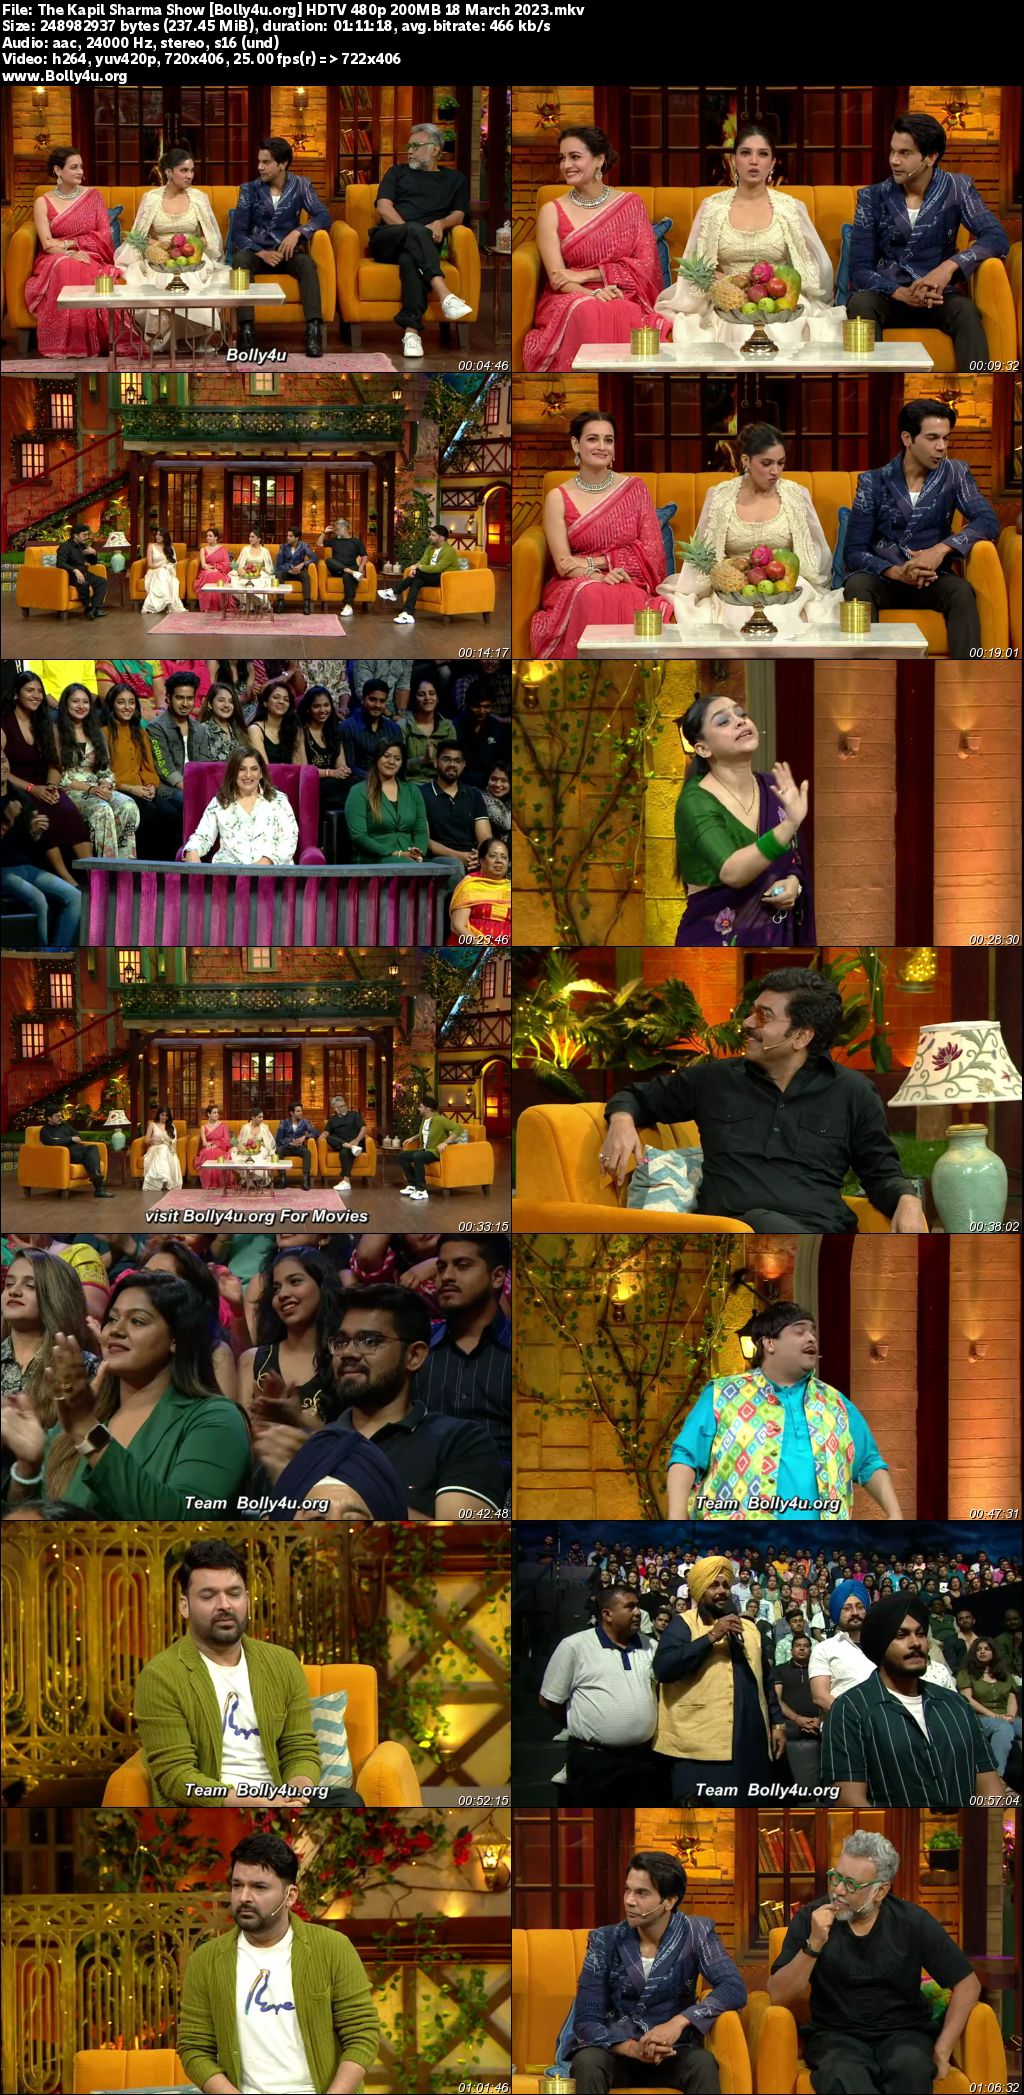 The Kapil Sharma Show HDTV 480p 200MB 18 March 2023 Download